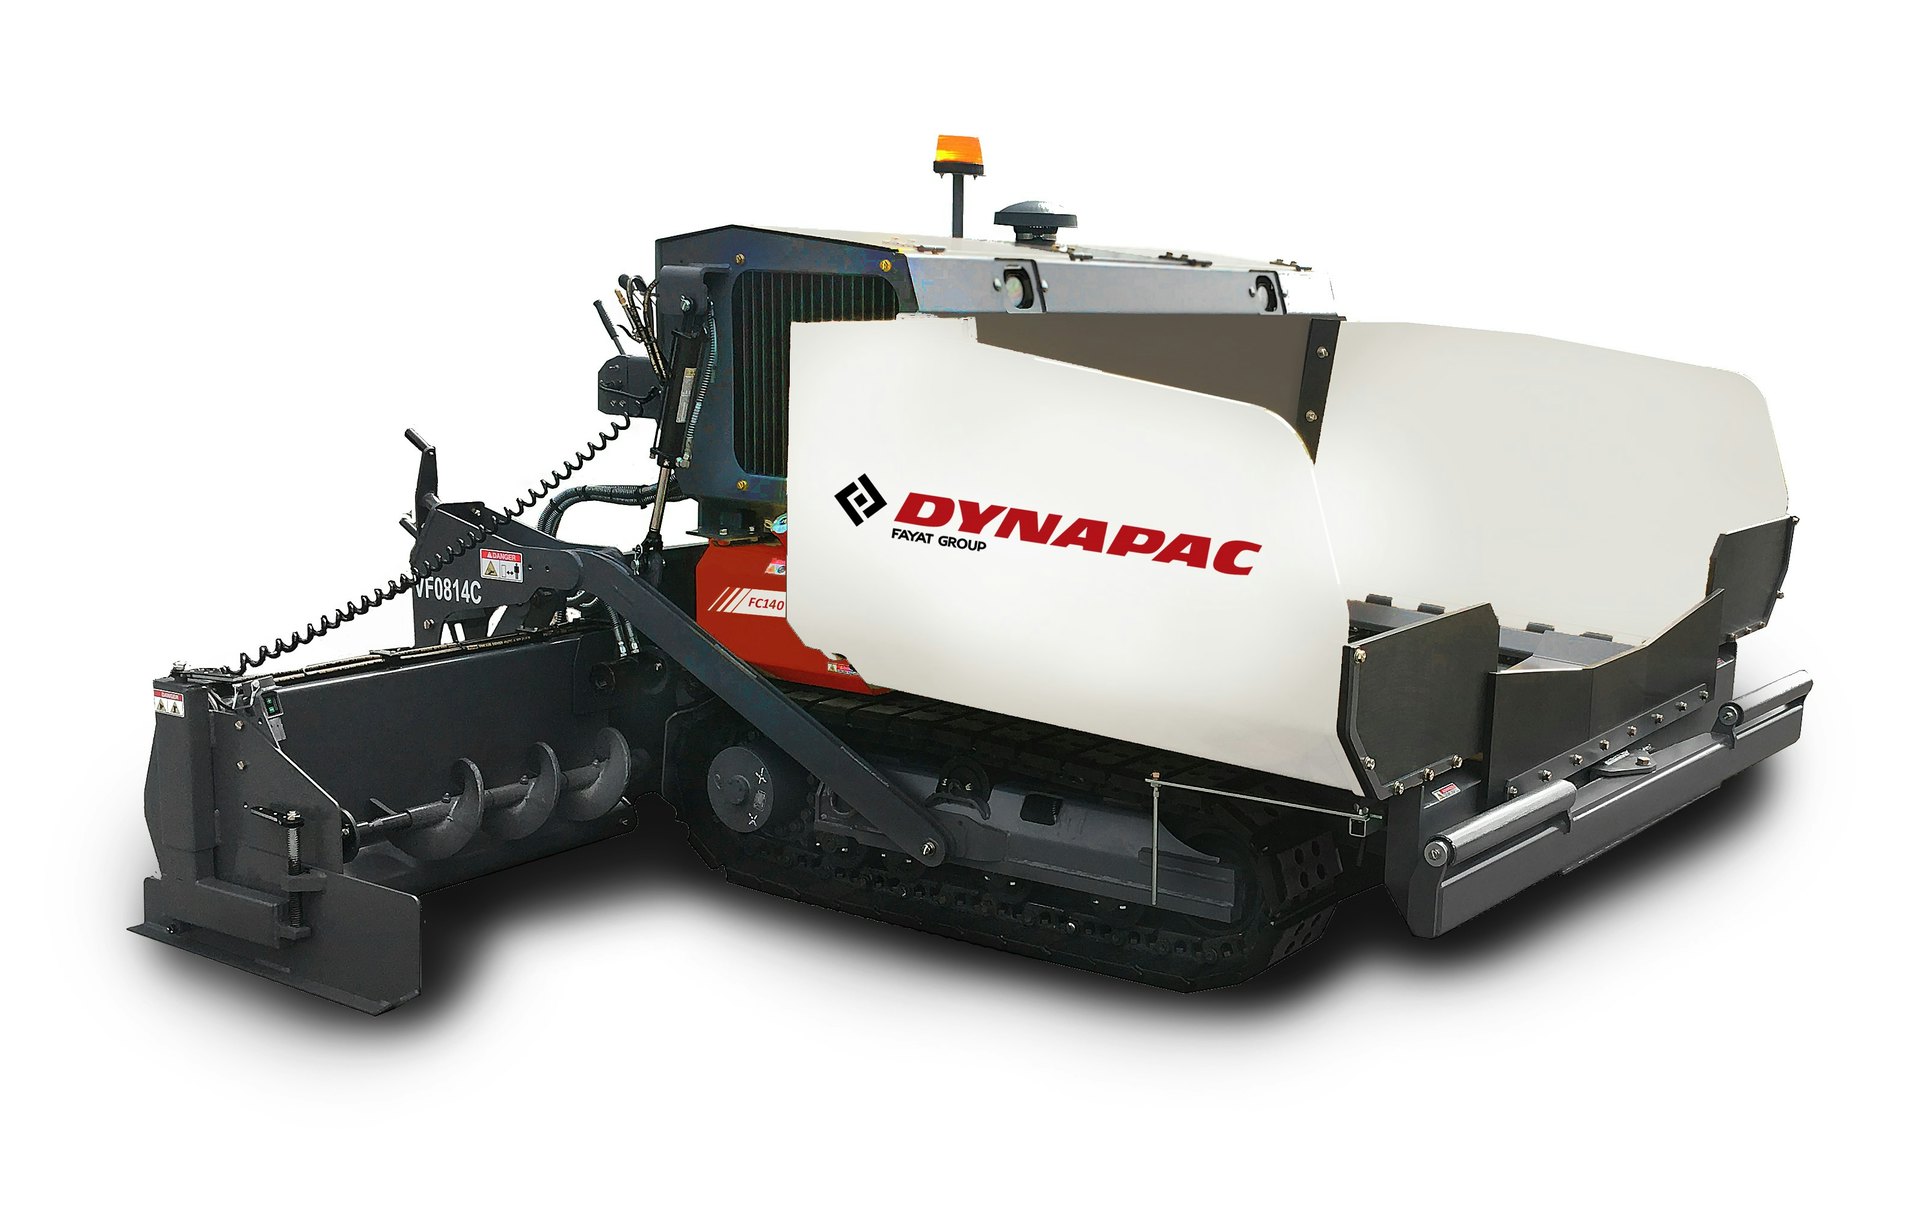 Dynapac FC1400C Commercial Class 8-ft Tracked Paver From: Dynapac USA